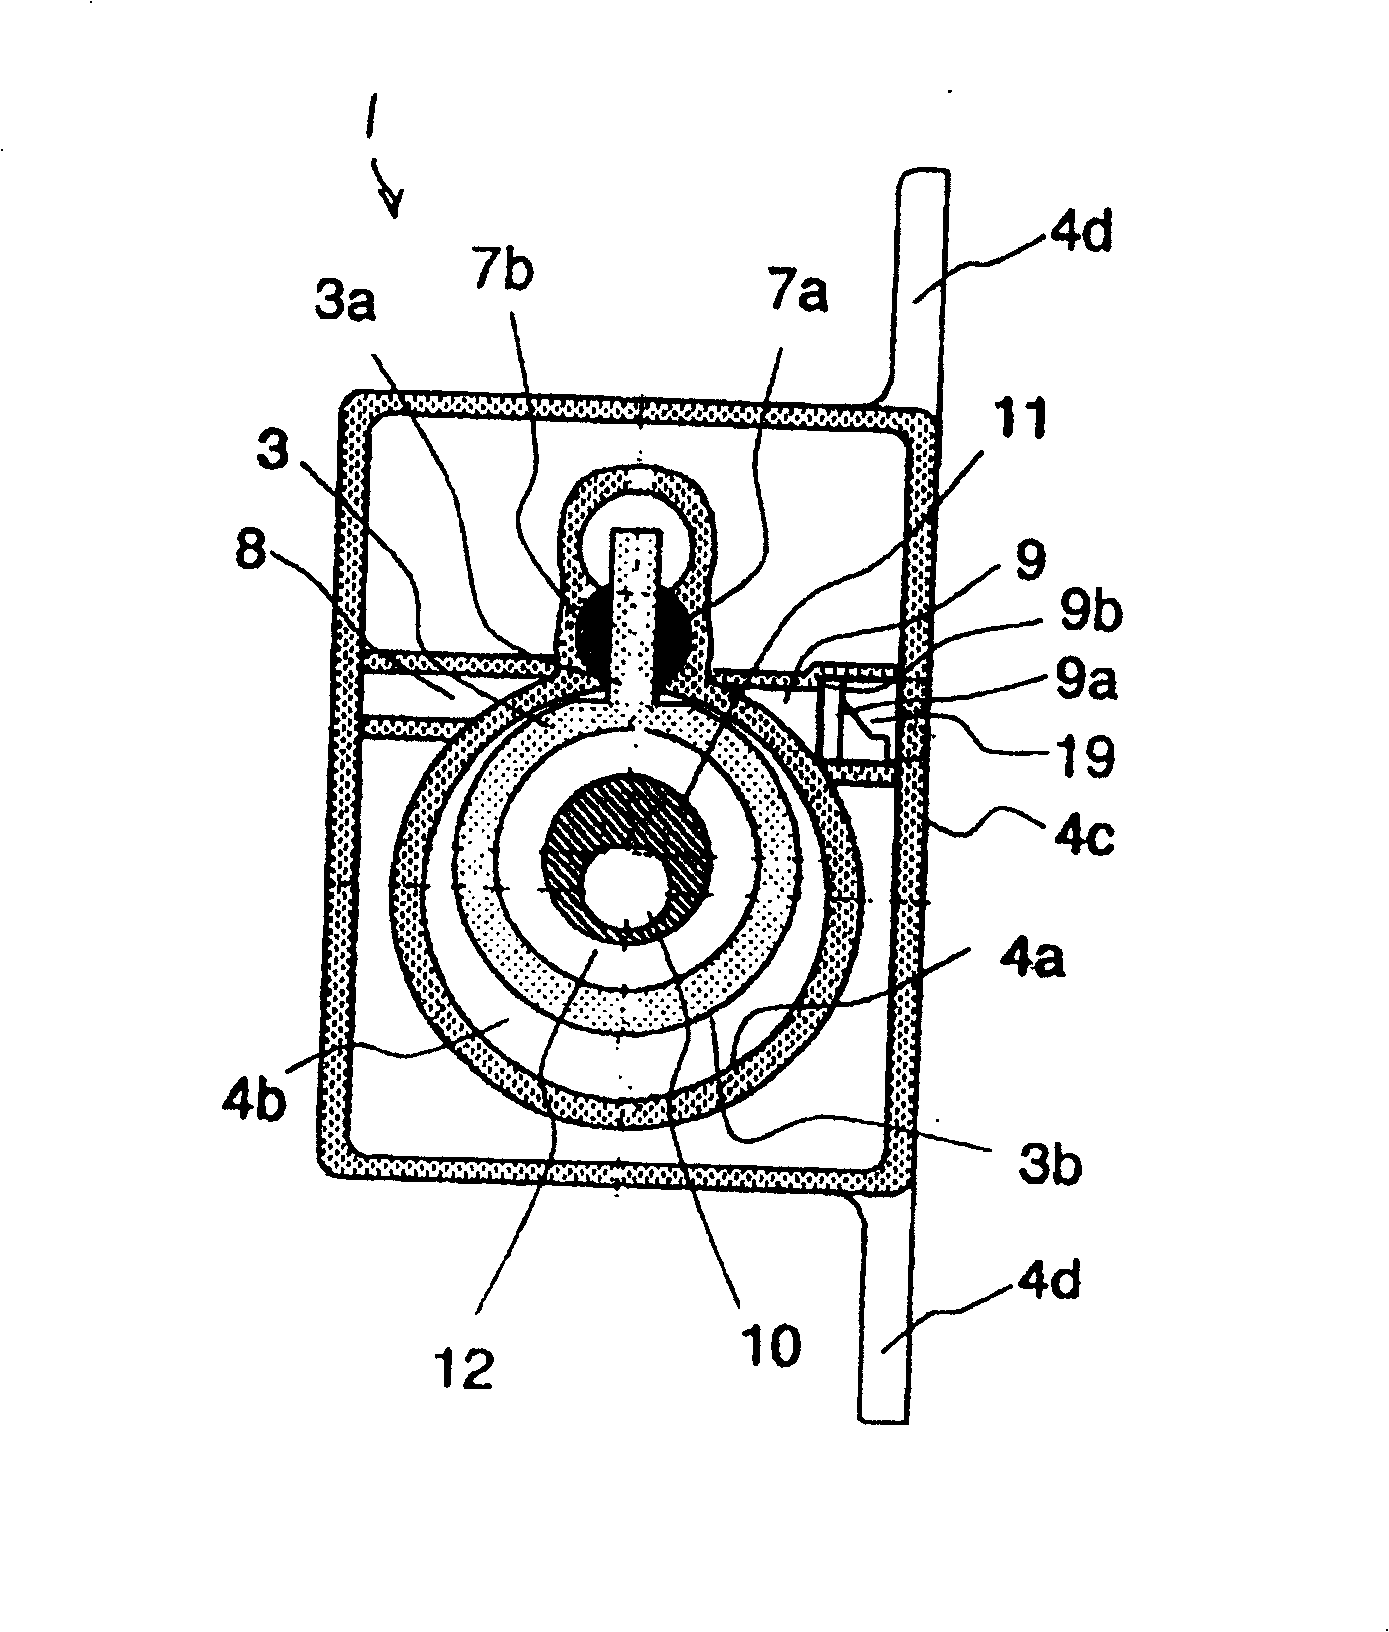 Hand-held vacuum pump and automated urinary drainage system using that vacuum pump